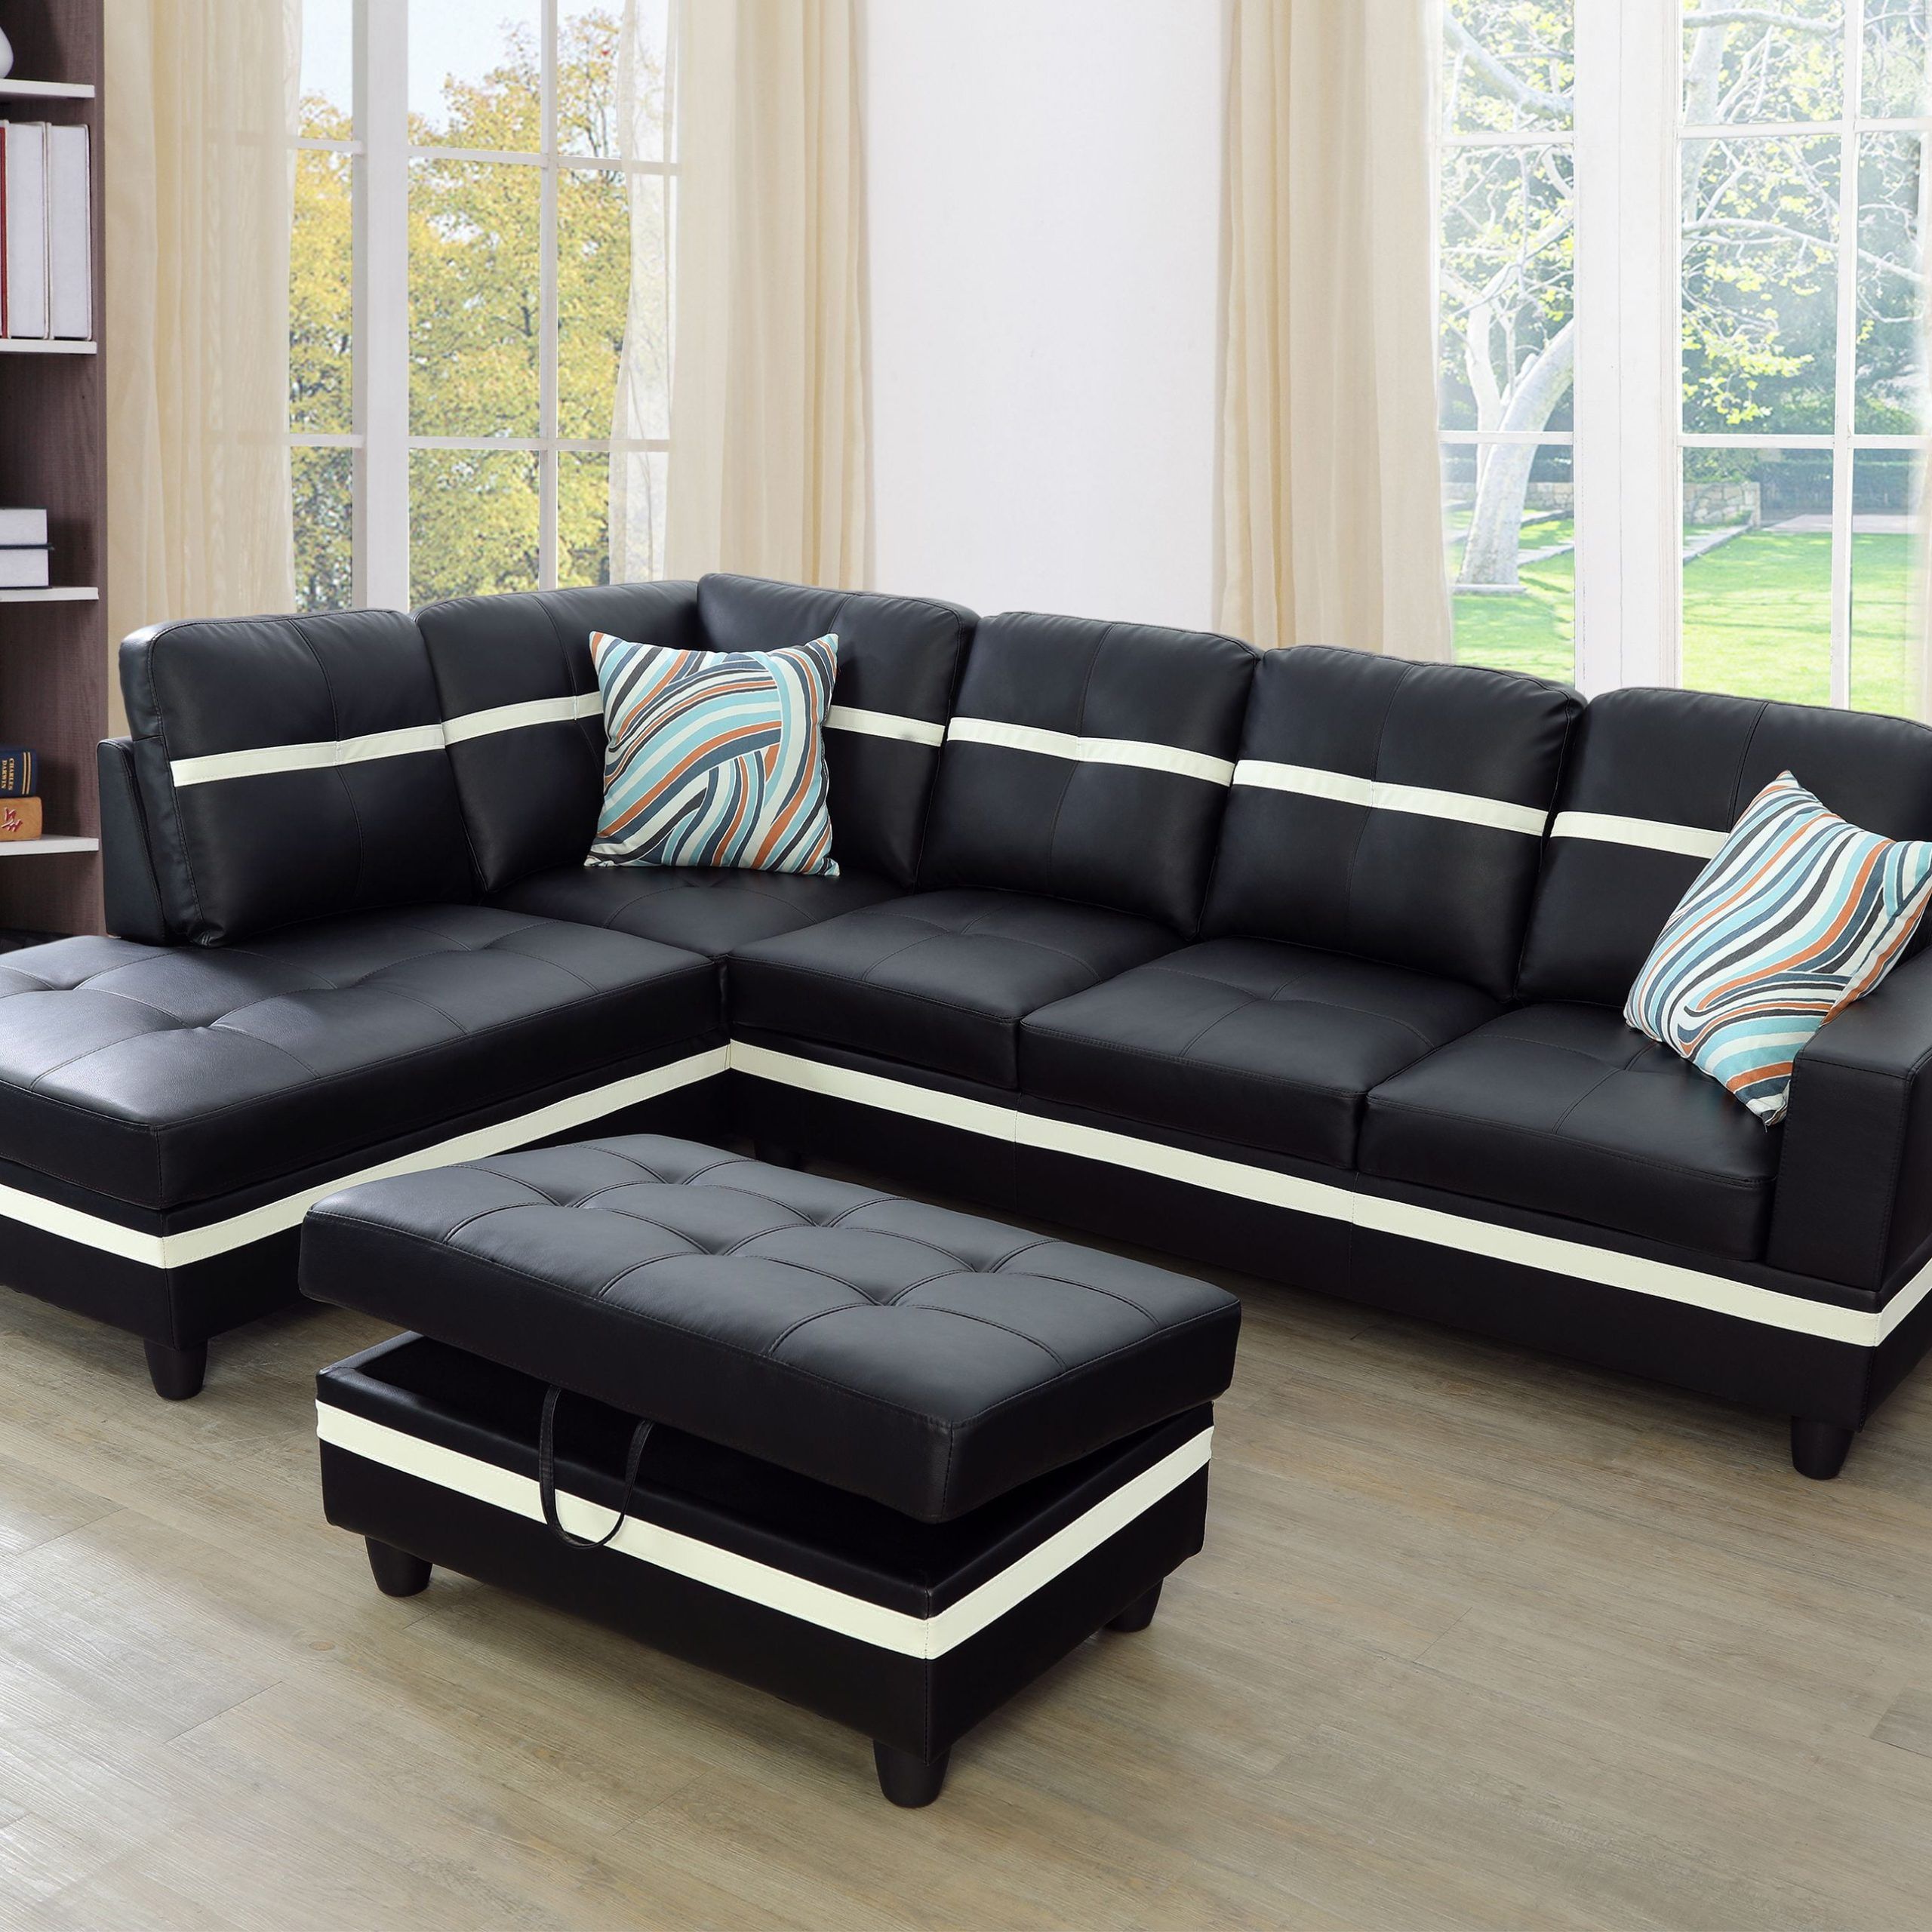 Trendy Aycp Furniture New Style  L Shape Sectional Sofa Set With Storage Intended For Sofas With Ottomans (View 10 of 15)